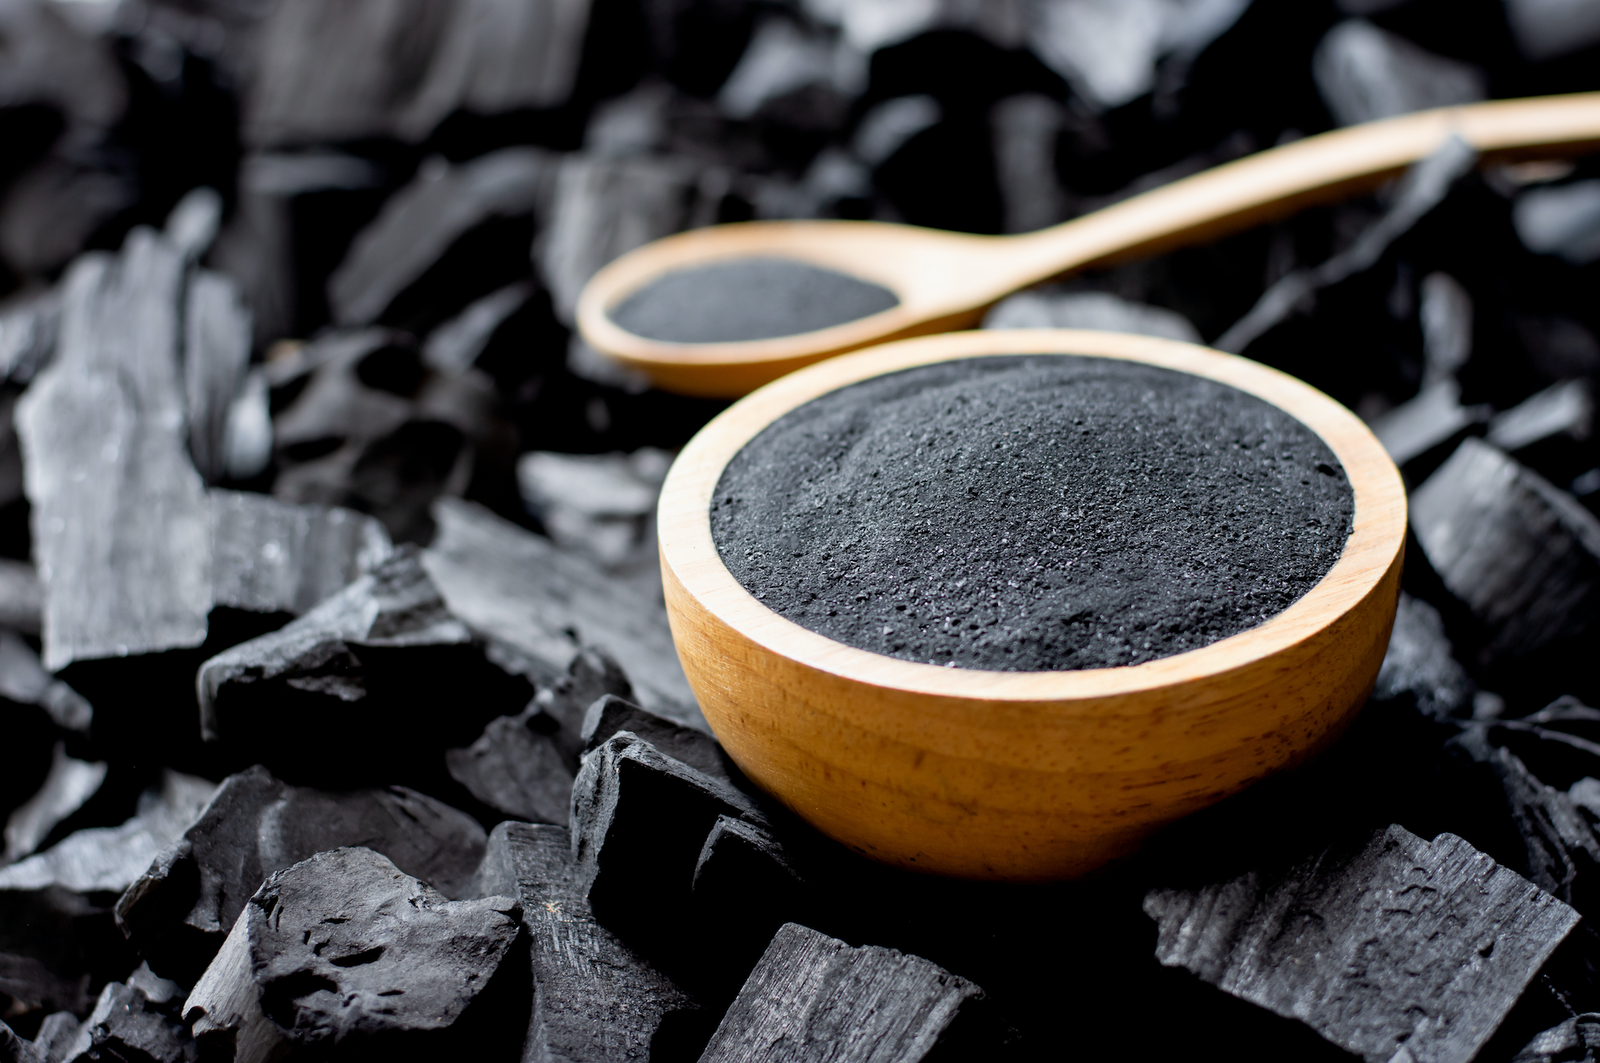 Activated Charcoal and the importance of sustainability